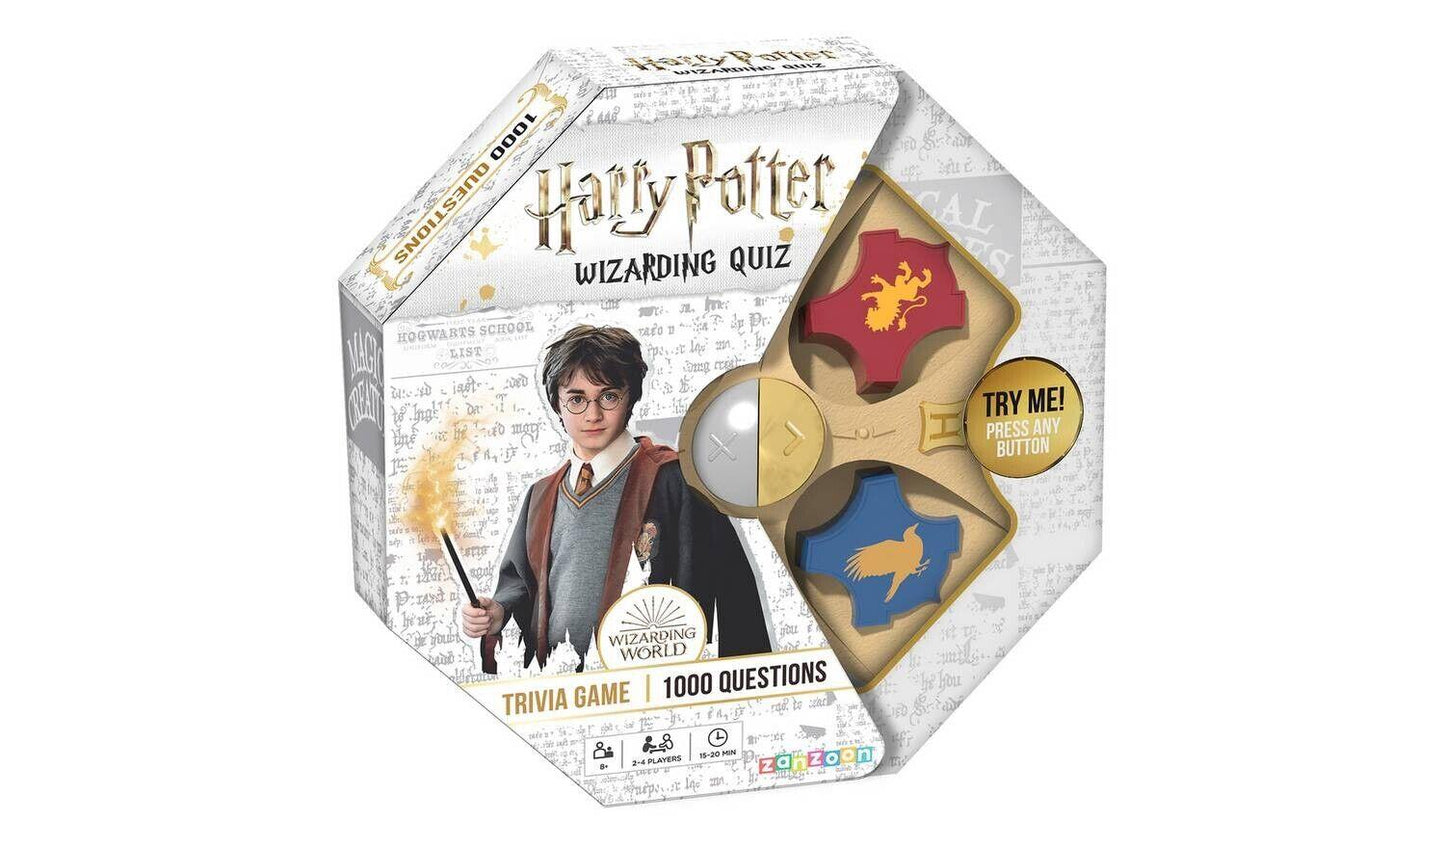 Harry Potter Wizarding Quiz Trivia Game T73181 1000+ Qs, 2 Levels, Ages 8+ TOMY